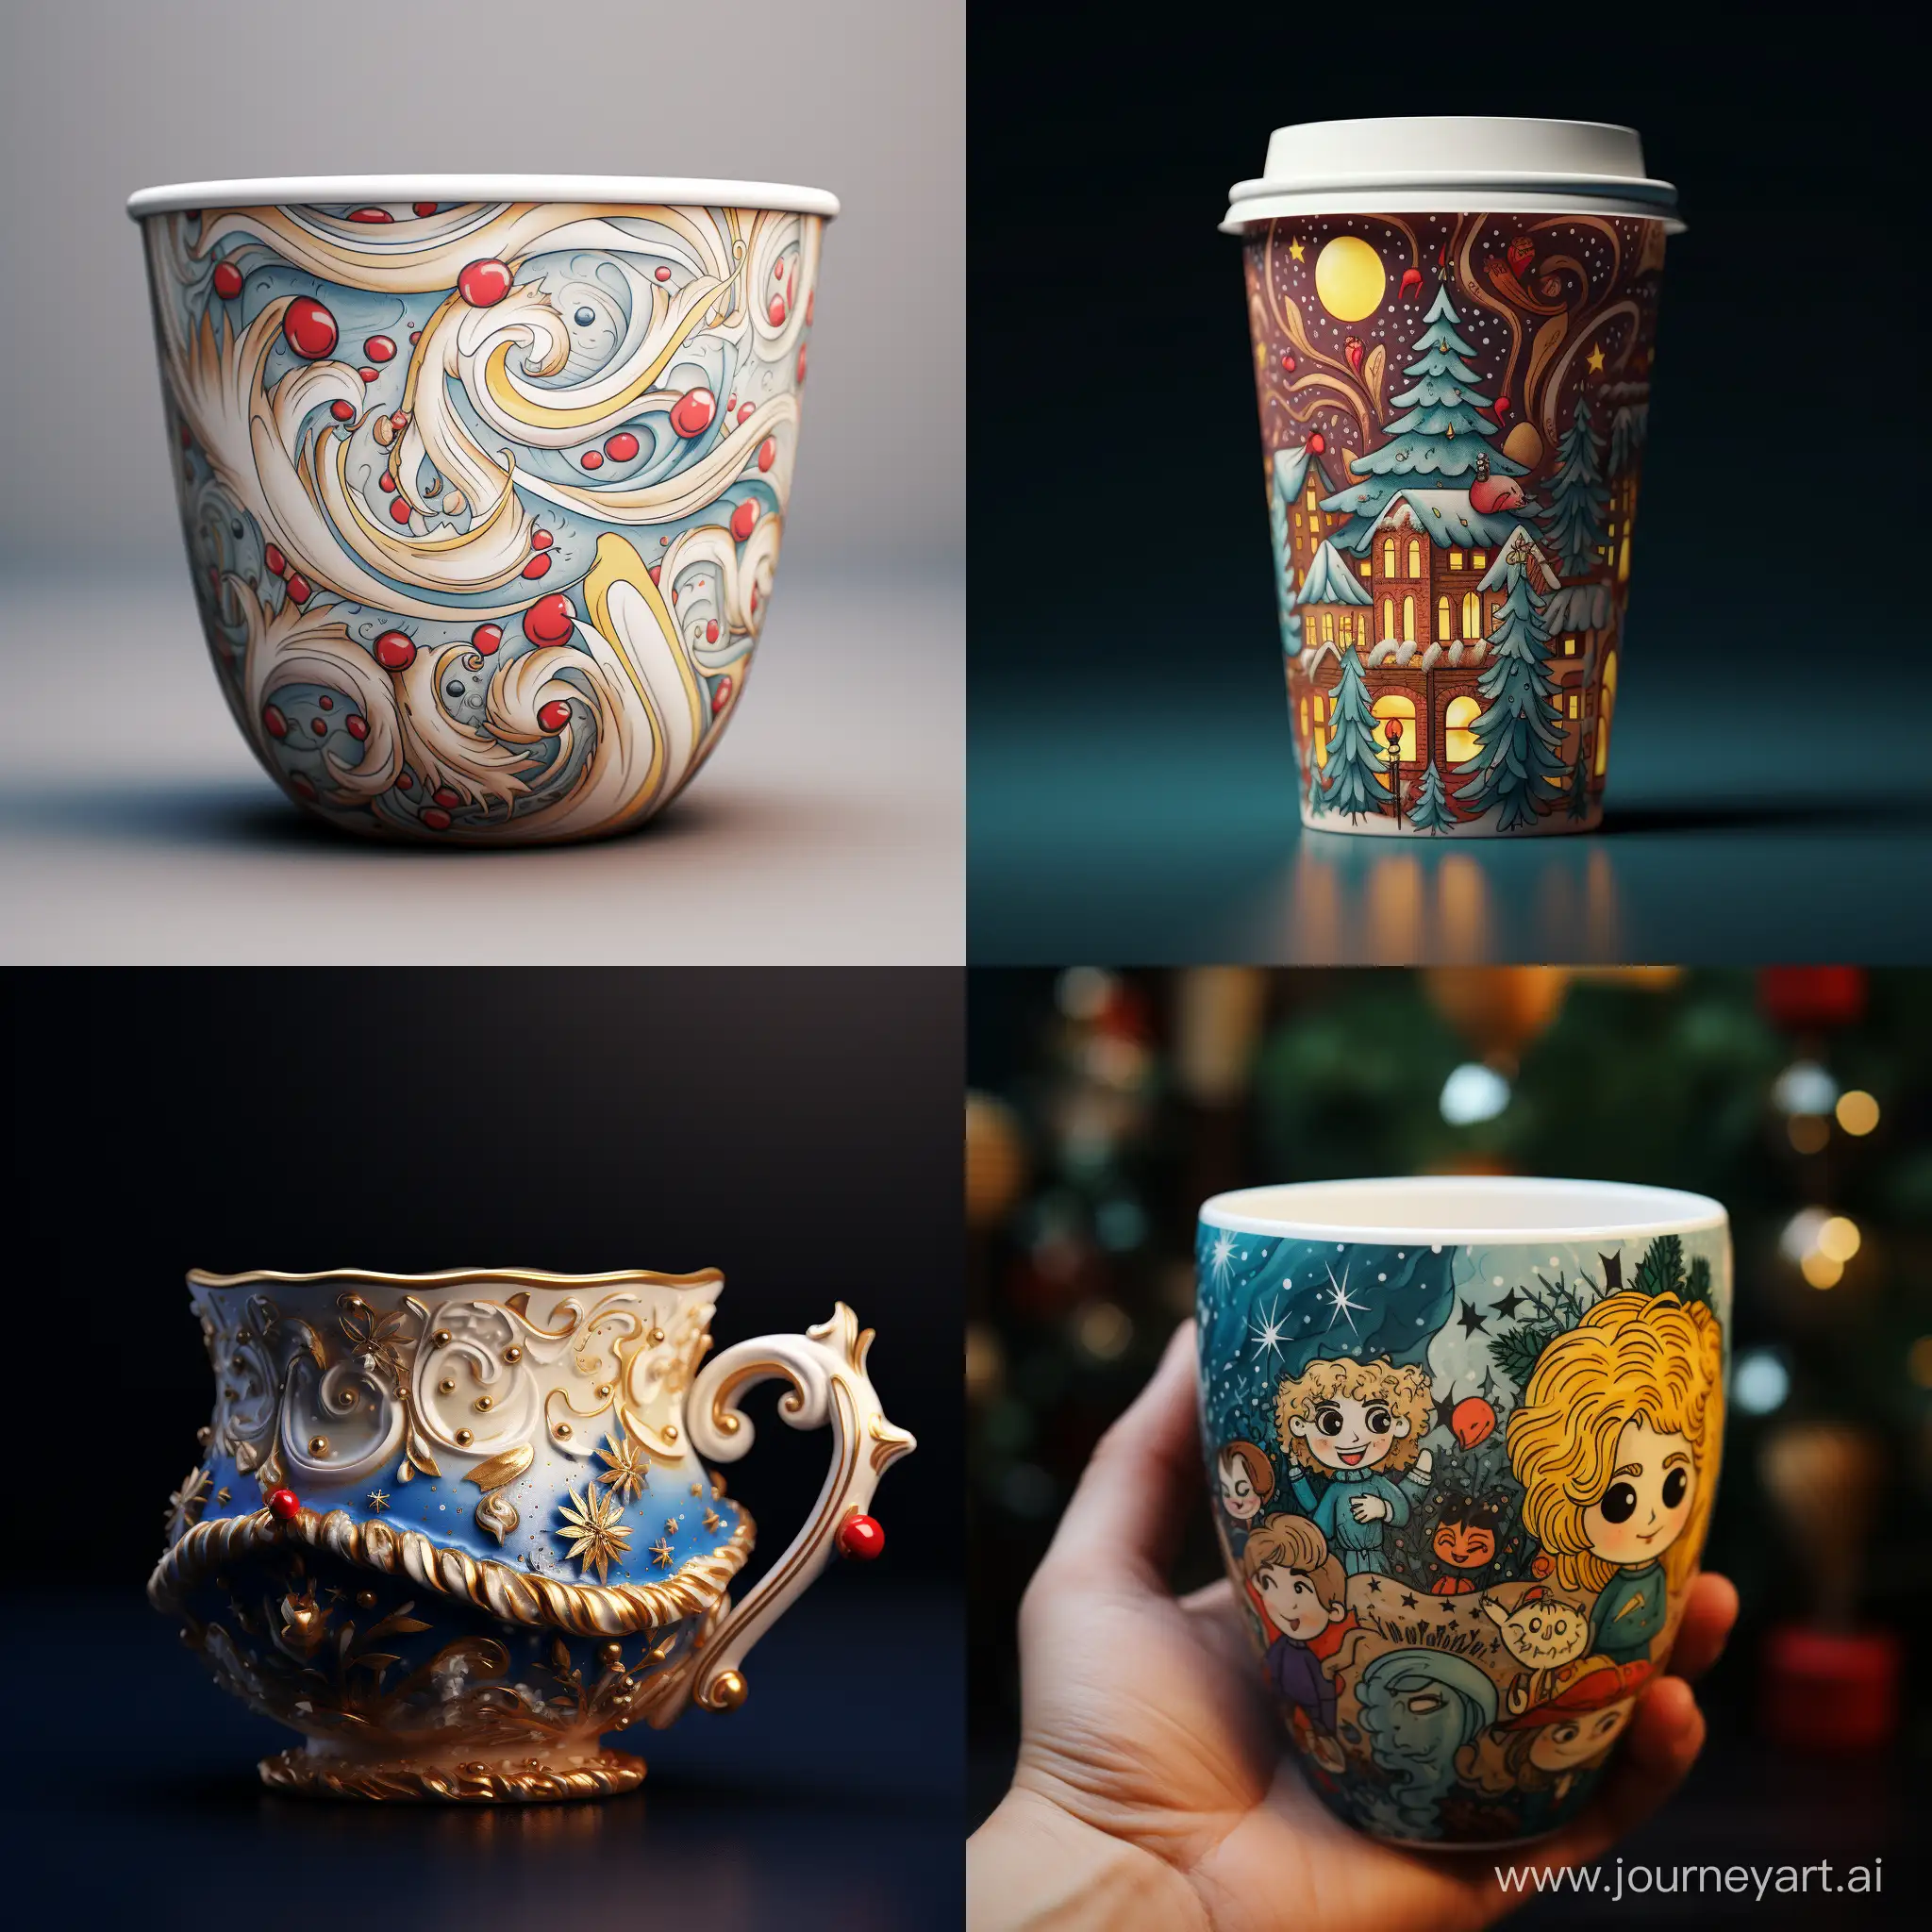 Festive-Christmas-Cup-with-Intricate-Holiday-Design